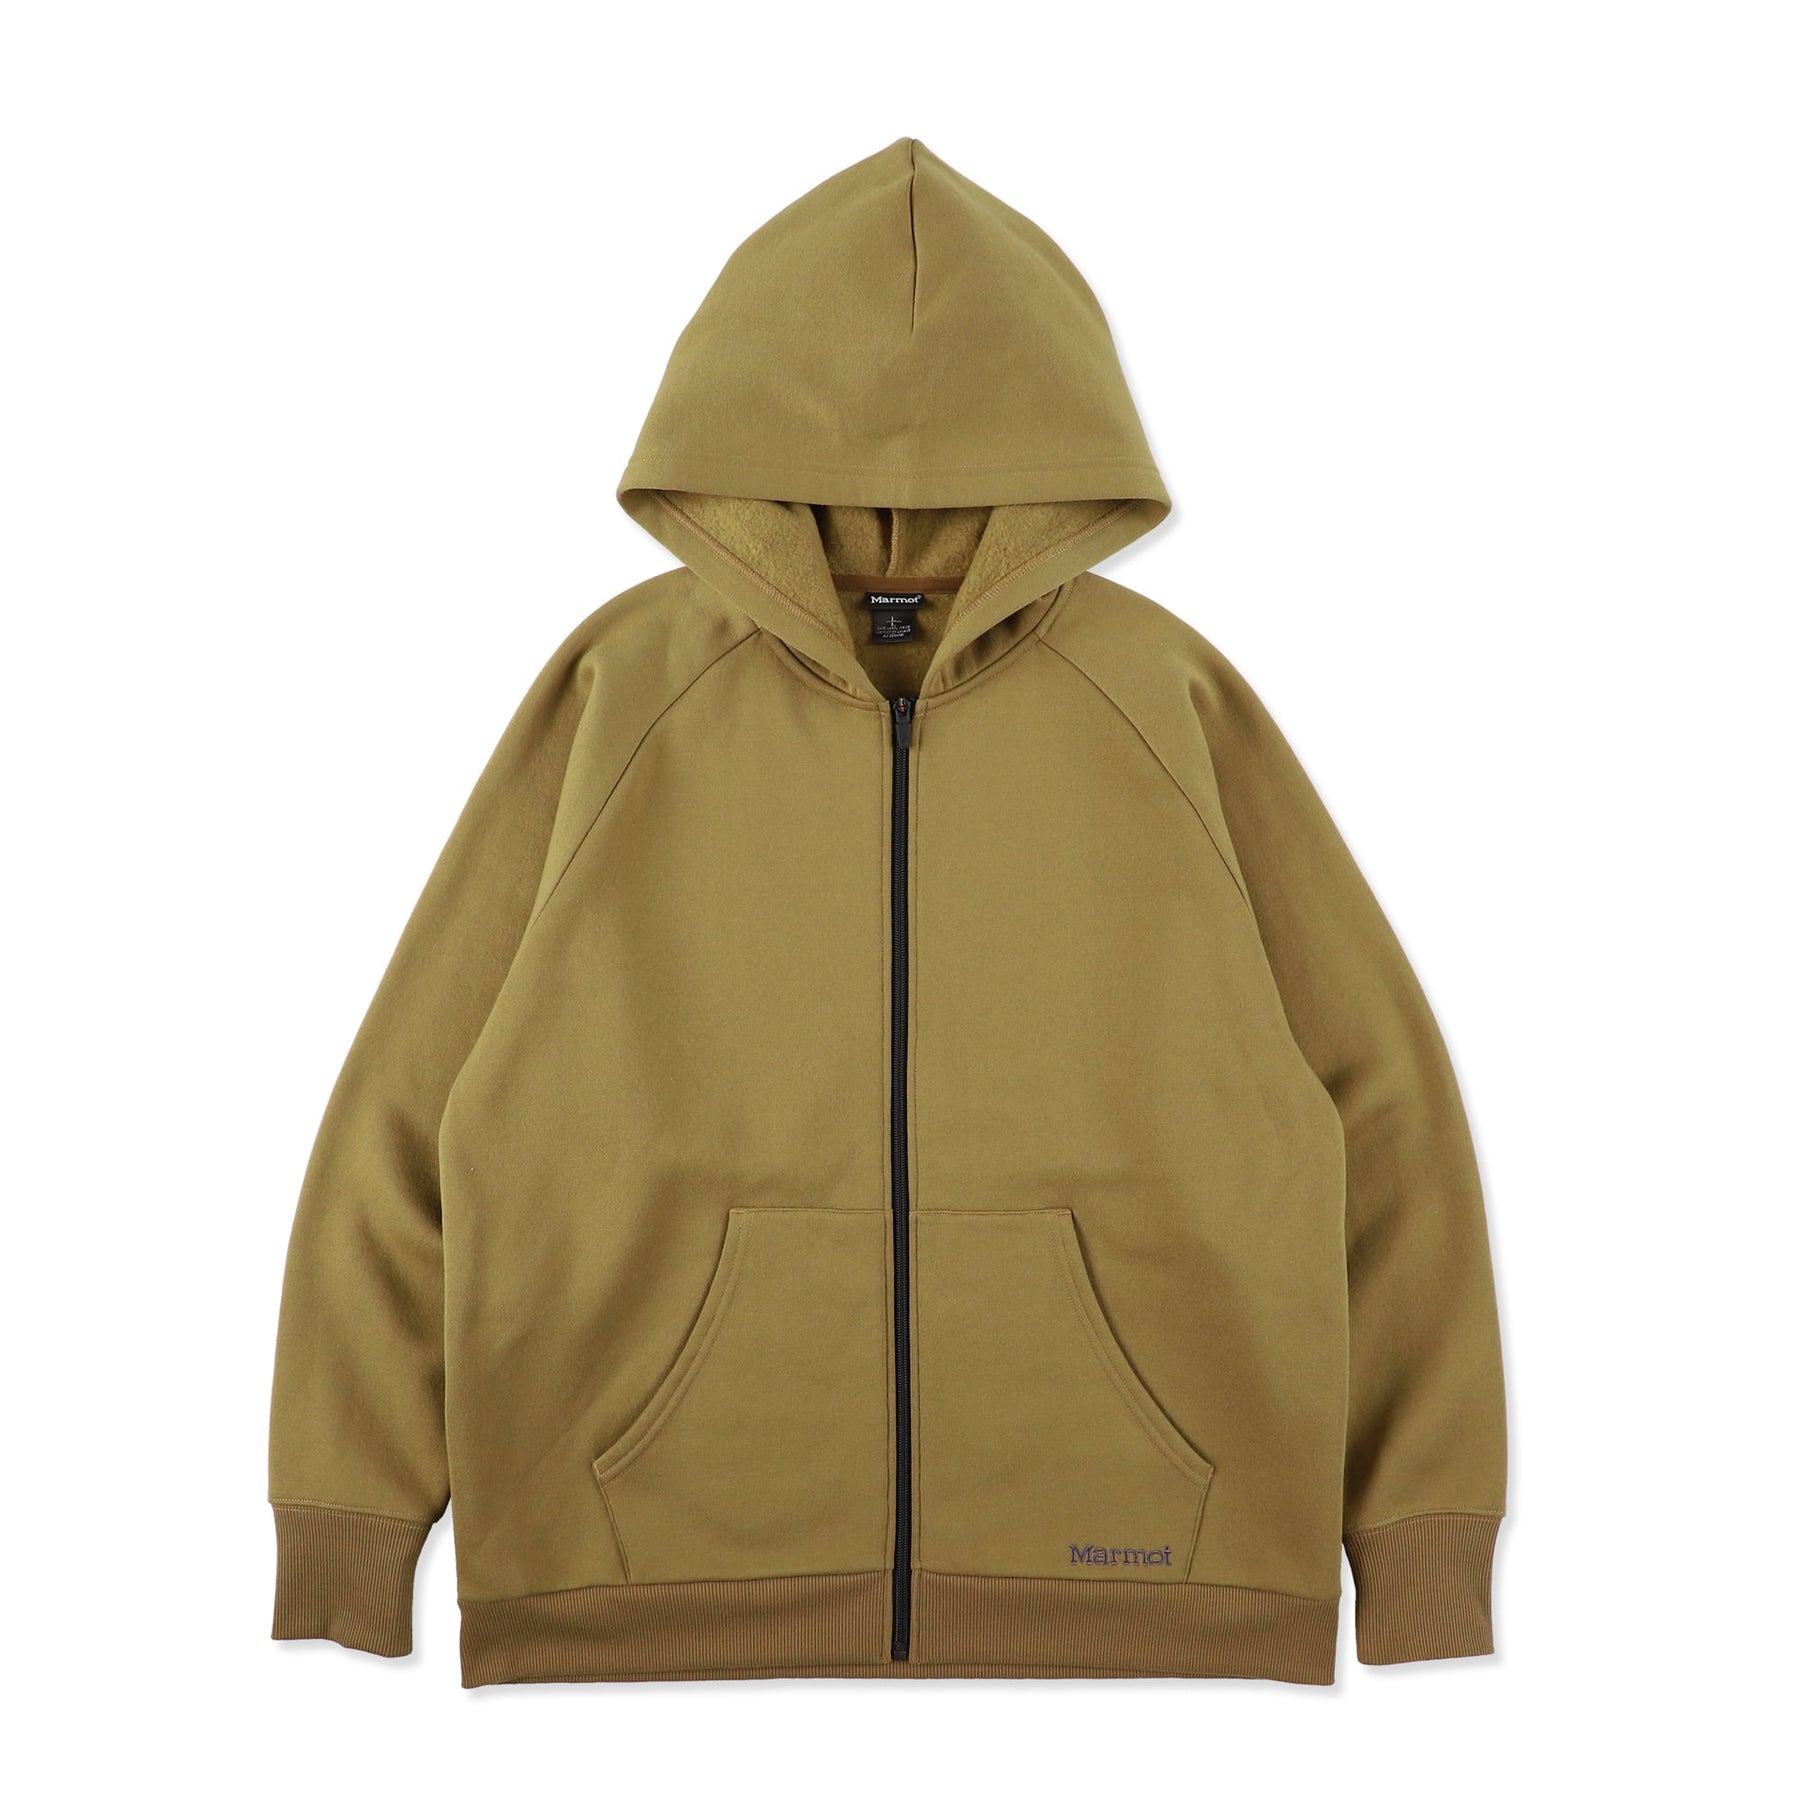 Camber x Toll free  Zip Parka